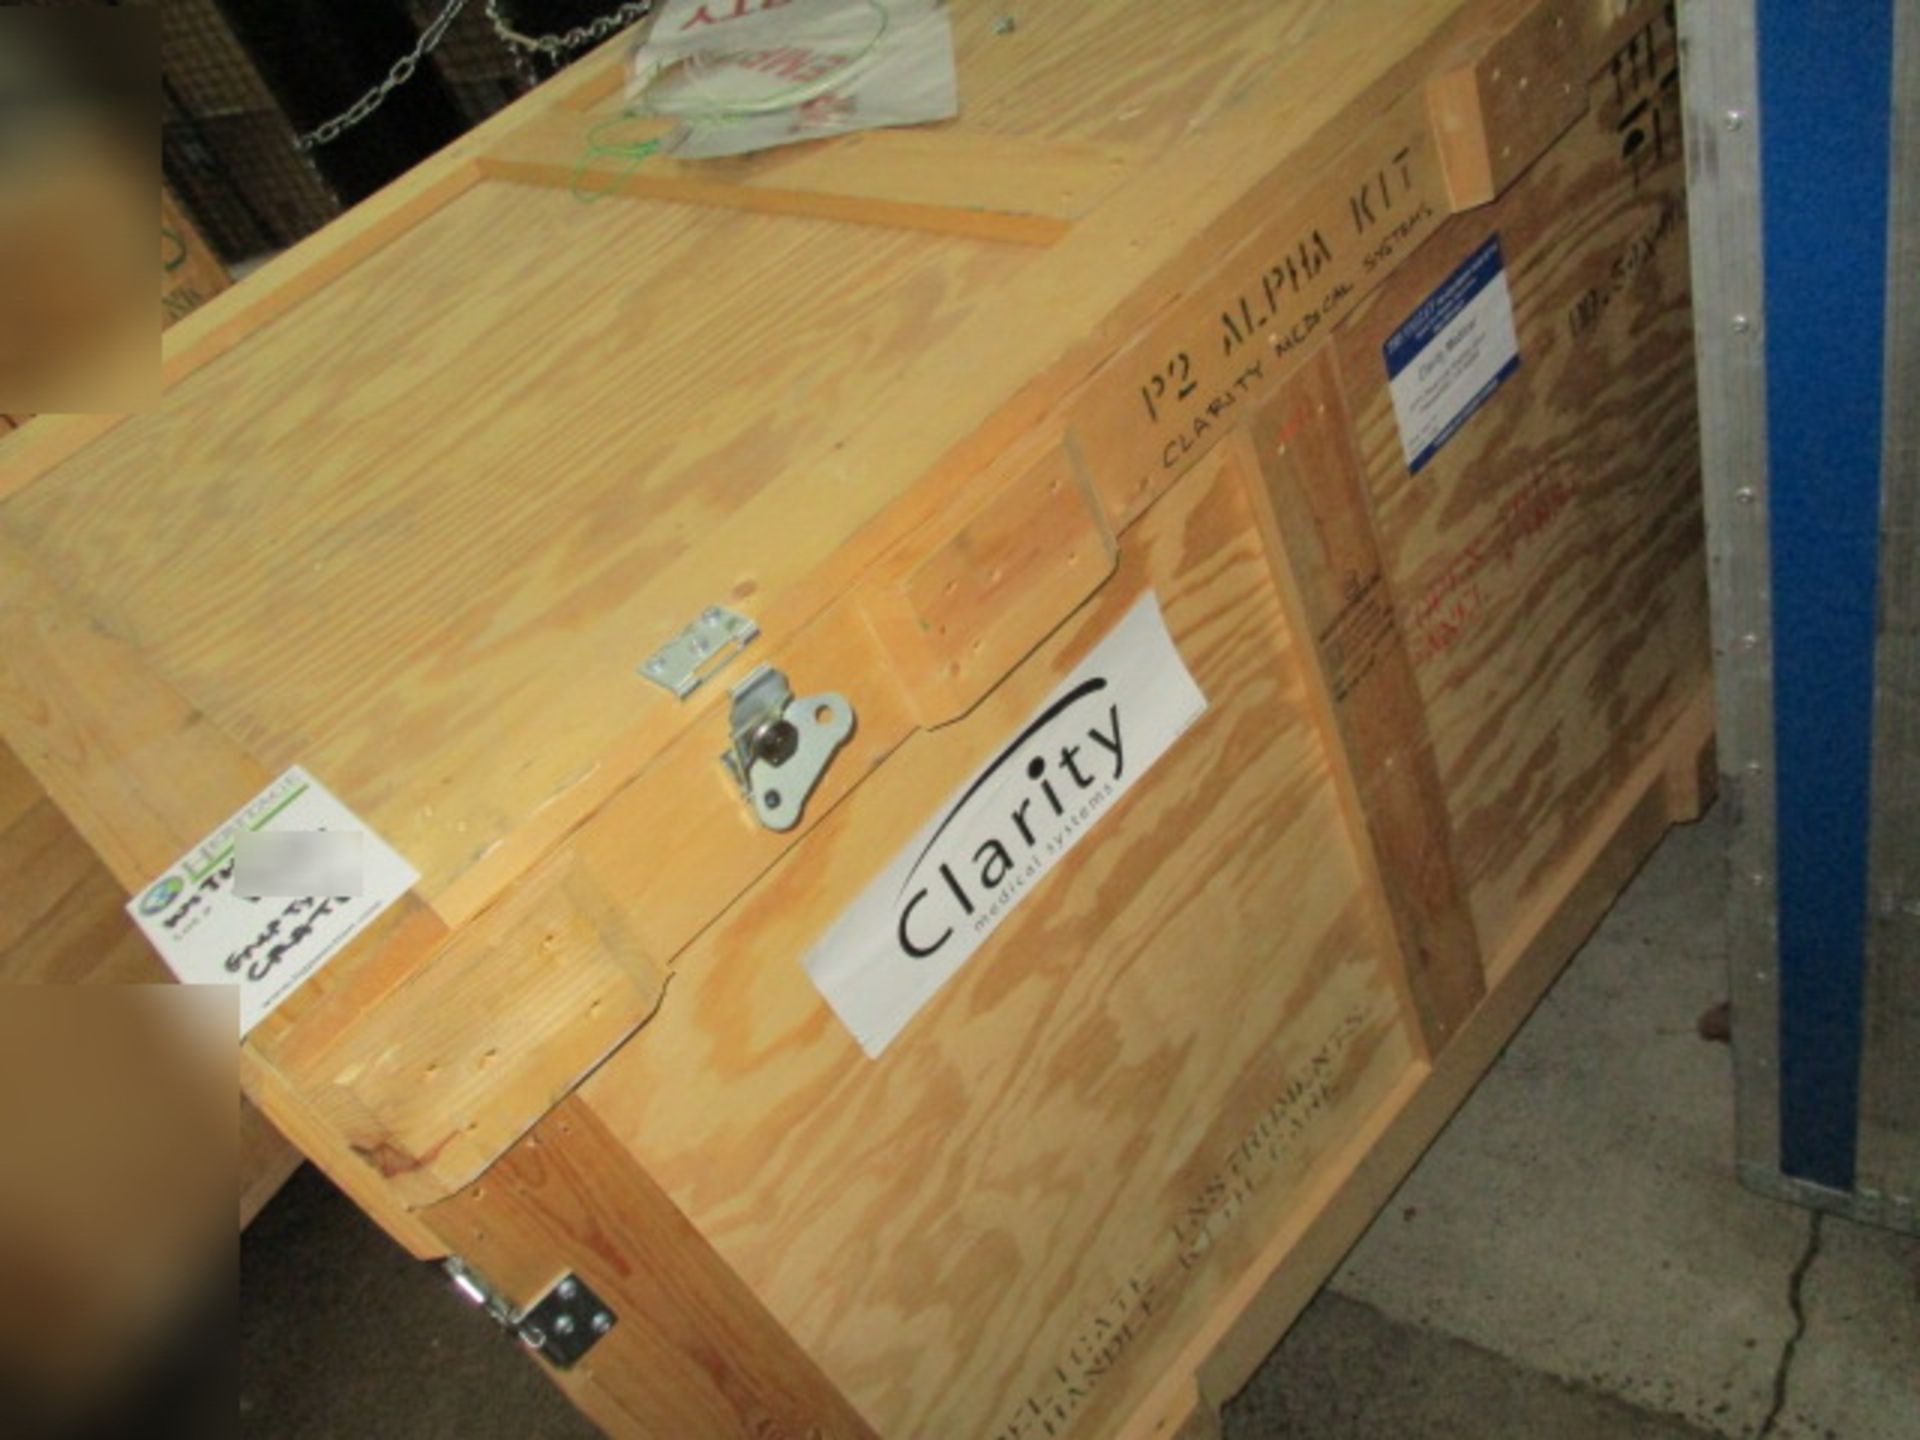 Shipping Room Furniture With Contents Of Box Packing Supplies. [Furniture: Particle-Board/Metal- - Image 4 of 4